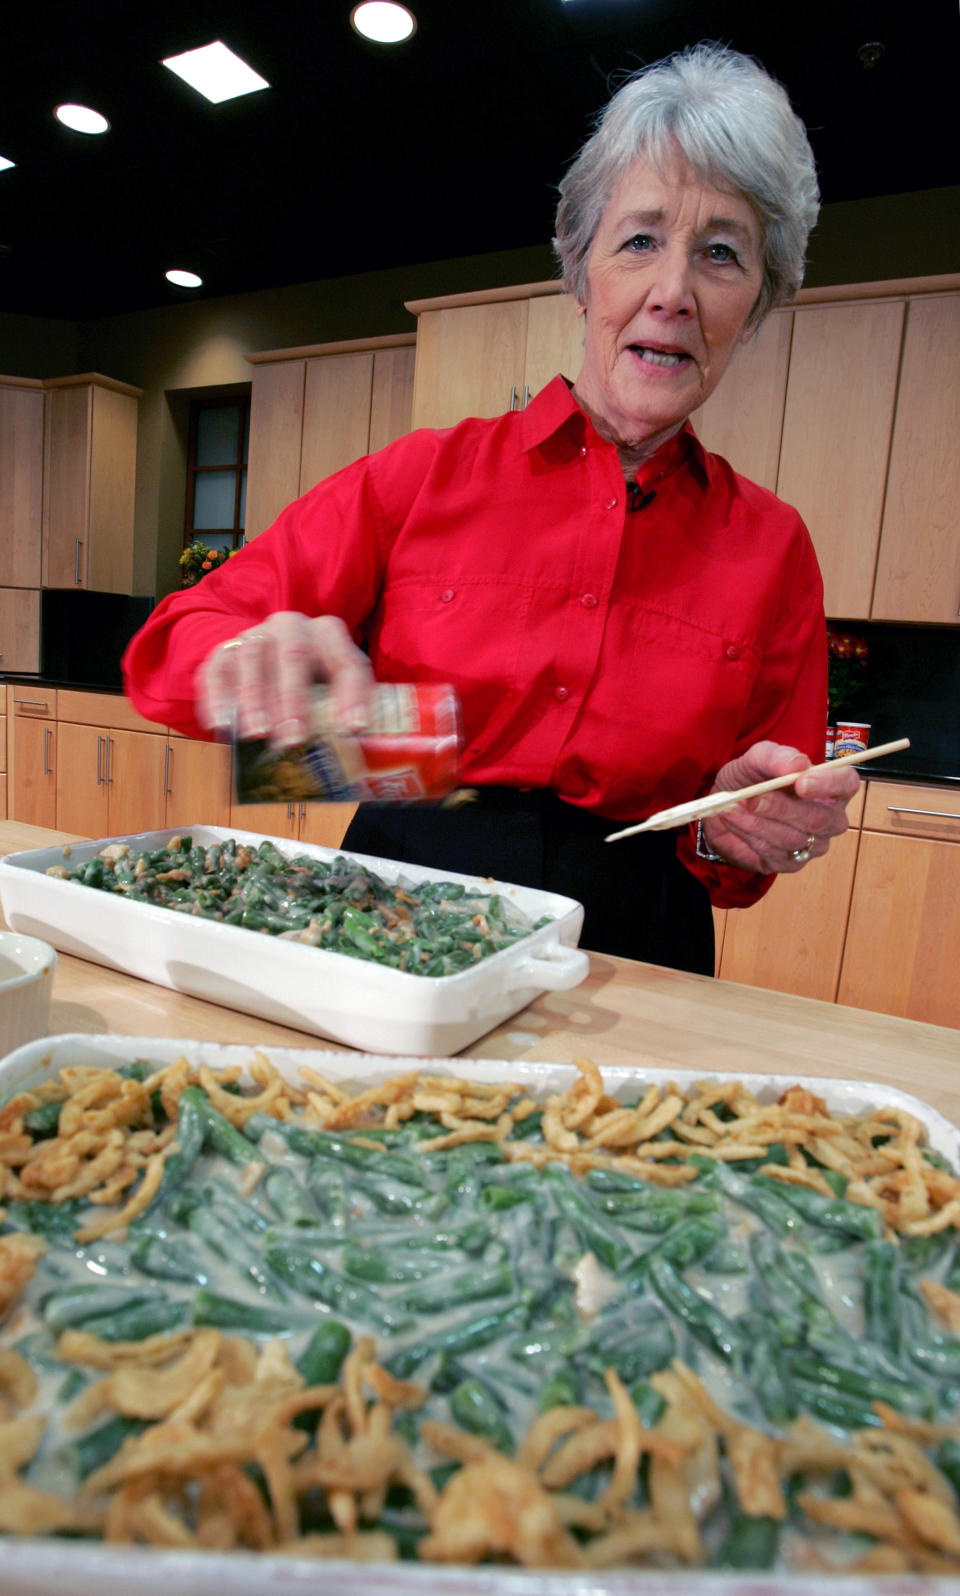 FILE - In this Nov. 15, 2005 file photo, a Green Bean Cassorole sits in the foreground as Dorcas Reilly prepares another at the Campbell Soup Co. corporate kitchen in Camden, N.J. Reilly died on Monday, Oct. 15, 2018 and her family will celebrate her life on Saturday, Oct. 27 in the town where she lived, Haddonfield, N.J. Reilly was a Campbell Soup kitchen supervisor in 1955 when she combined green beans and cream of mushroom soup, topped with crunchy fried onions, for an Associated Press feature. It is the most popular recipe ever to come out of the corporate kitchen at Campbell Soup. (AP Photo/Mel Evans, File)